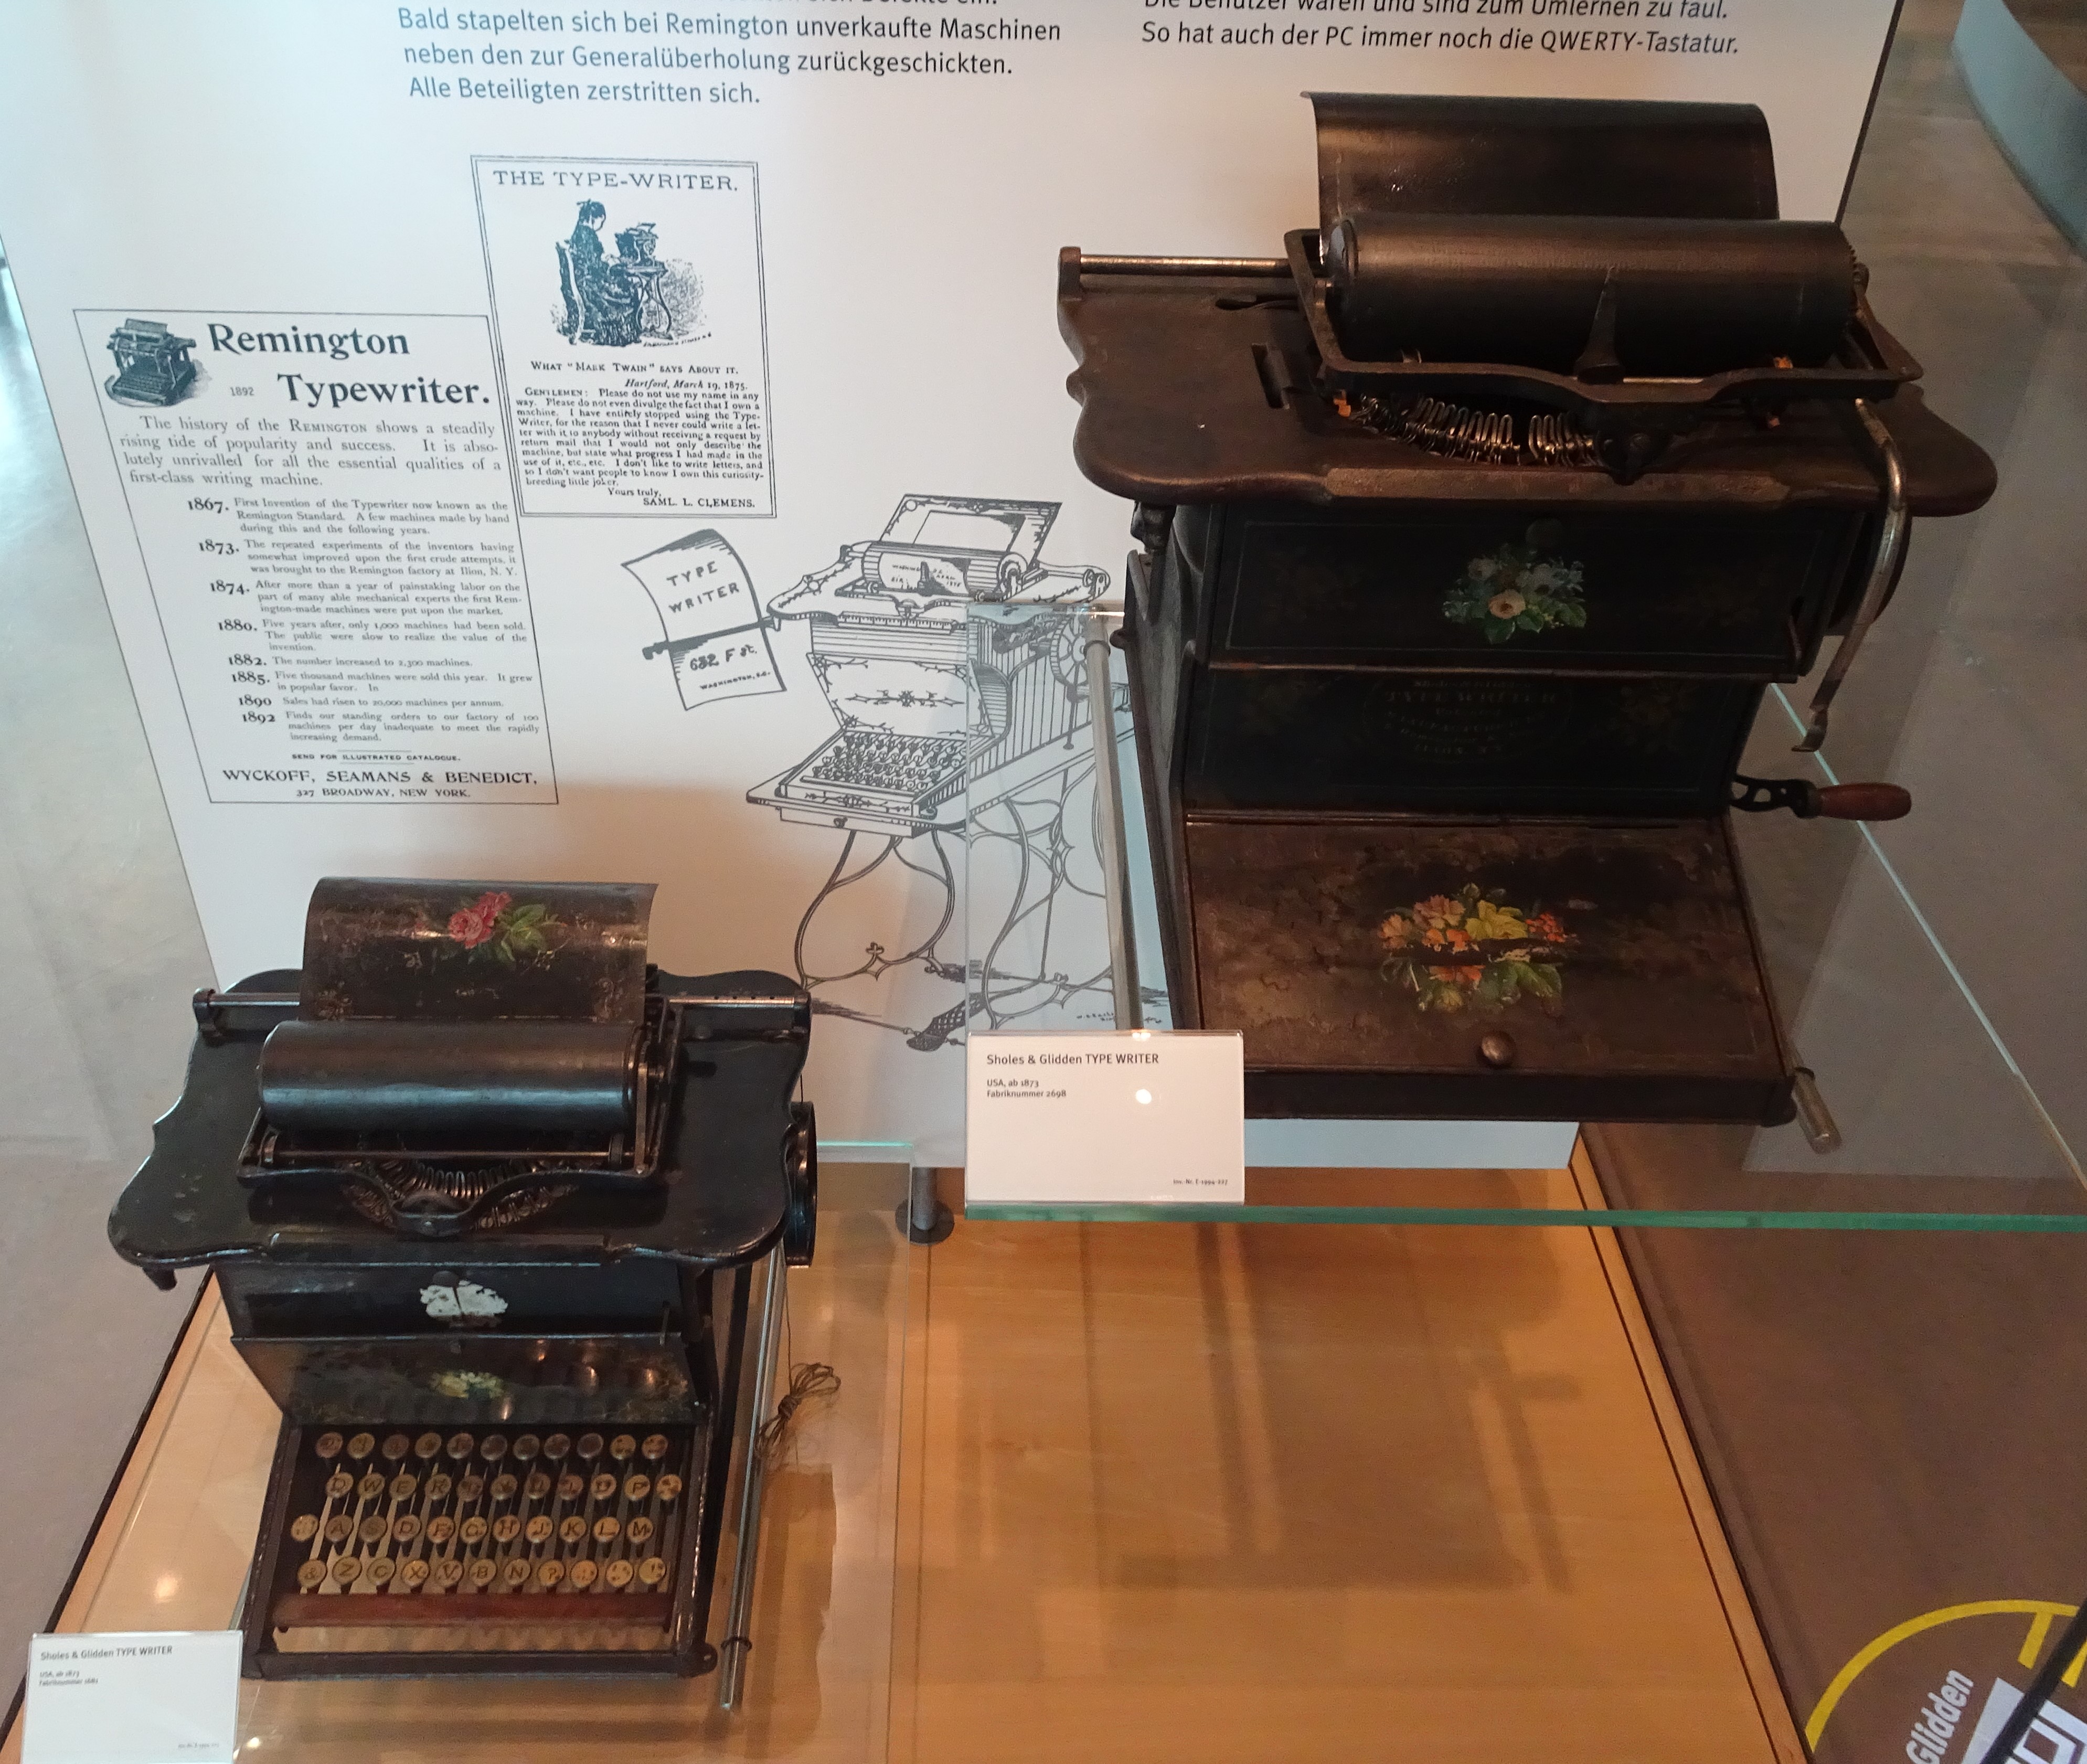 Two ancient typewrites in a museum